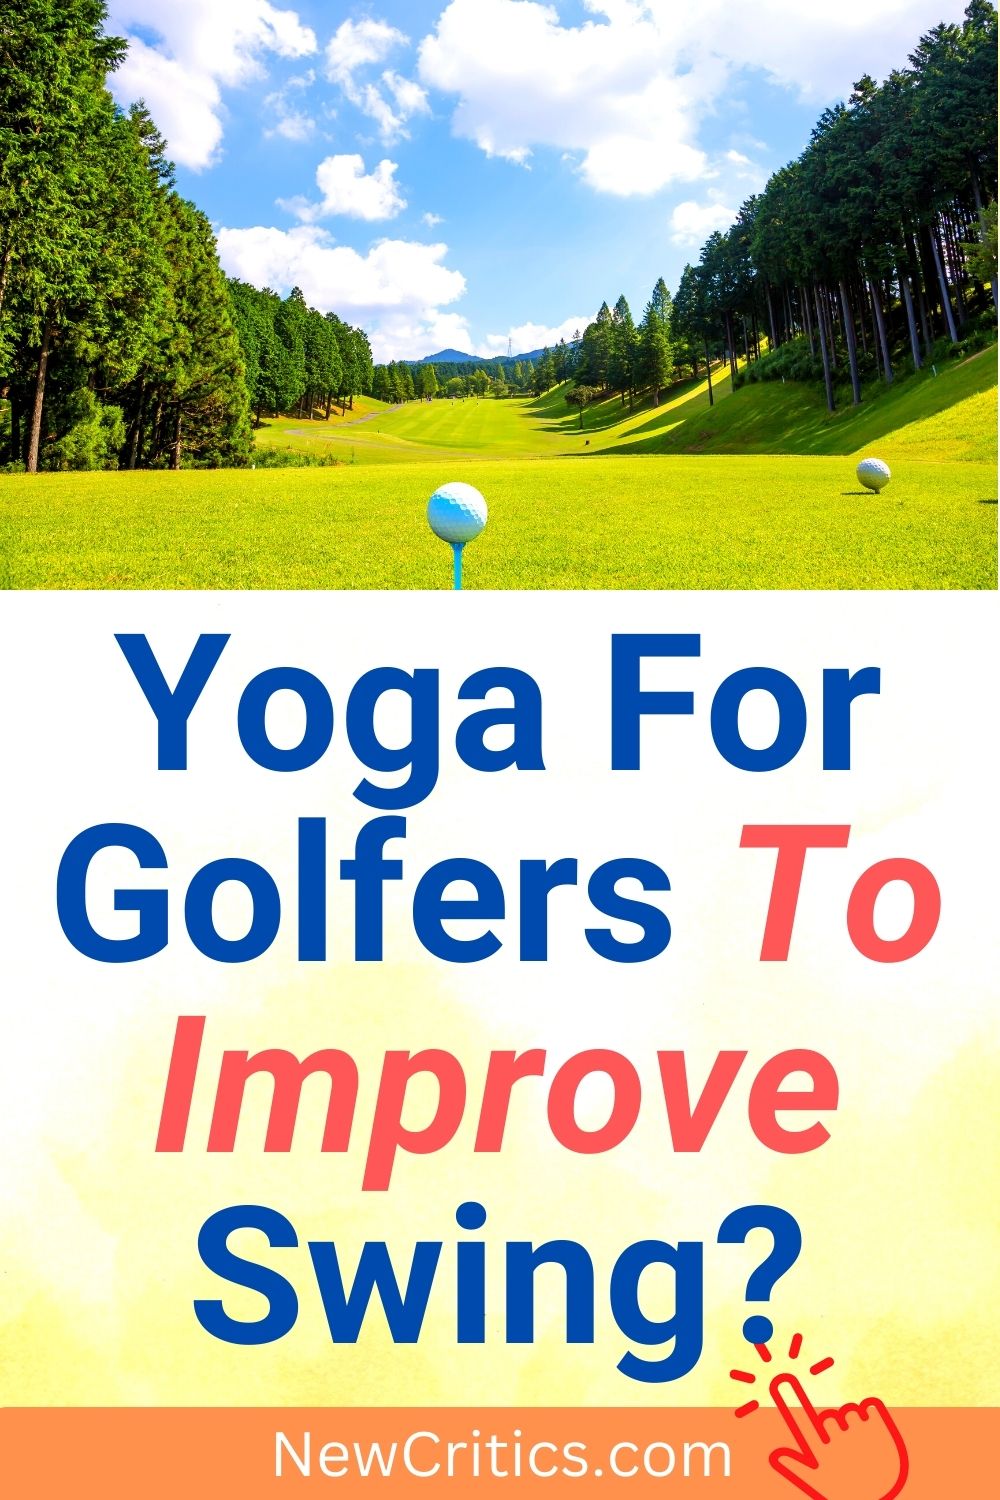 Yoga For Golfers To Improve Swing / Canva